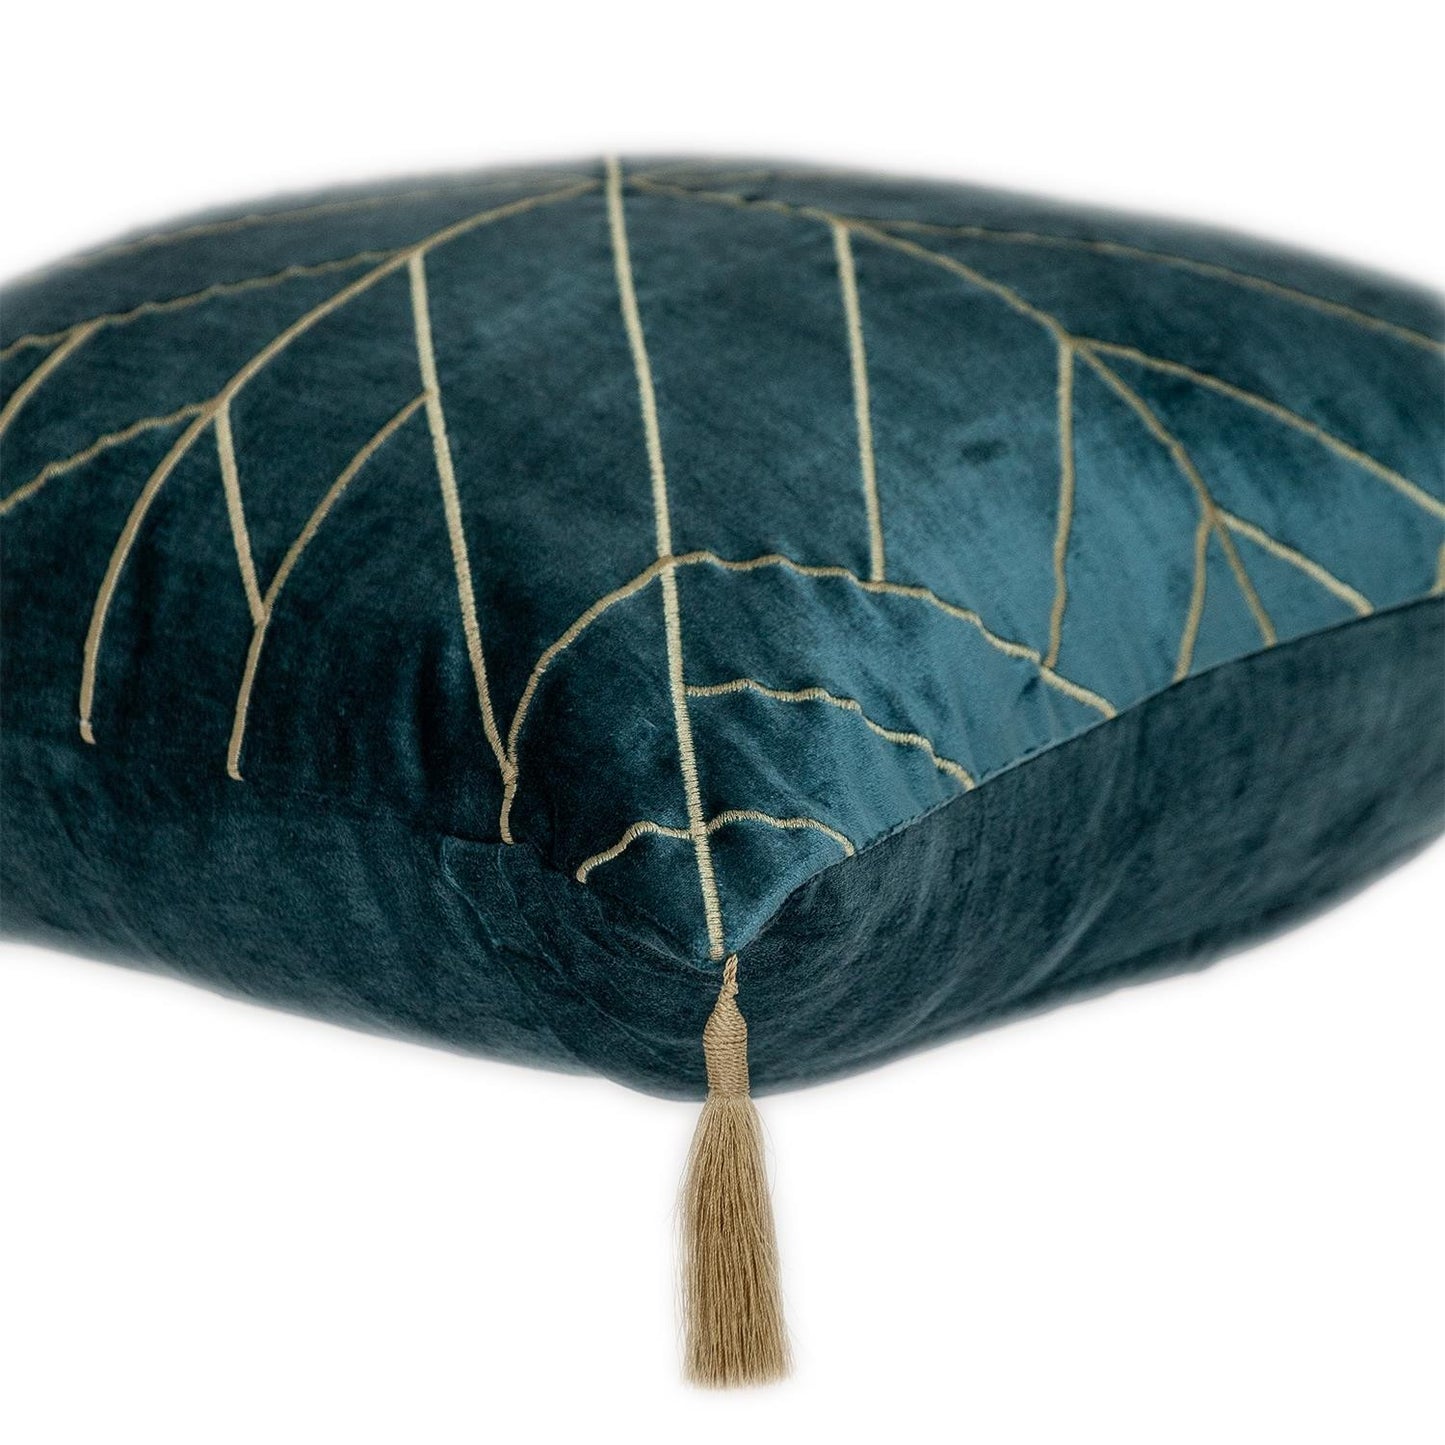 Teal and Gold Geo Velvet Throw Pillow with Gold Tassels